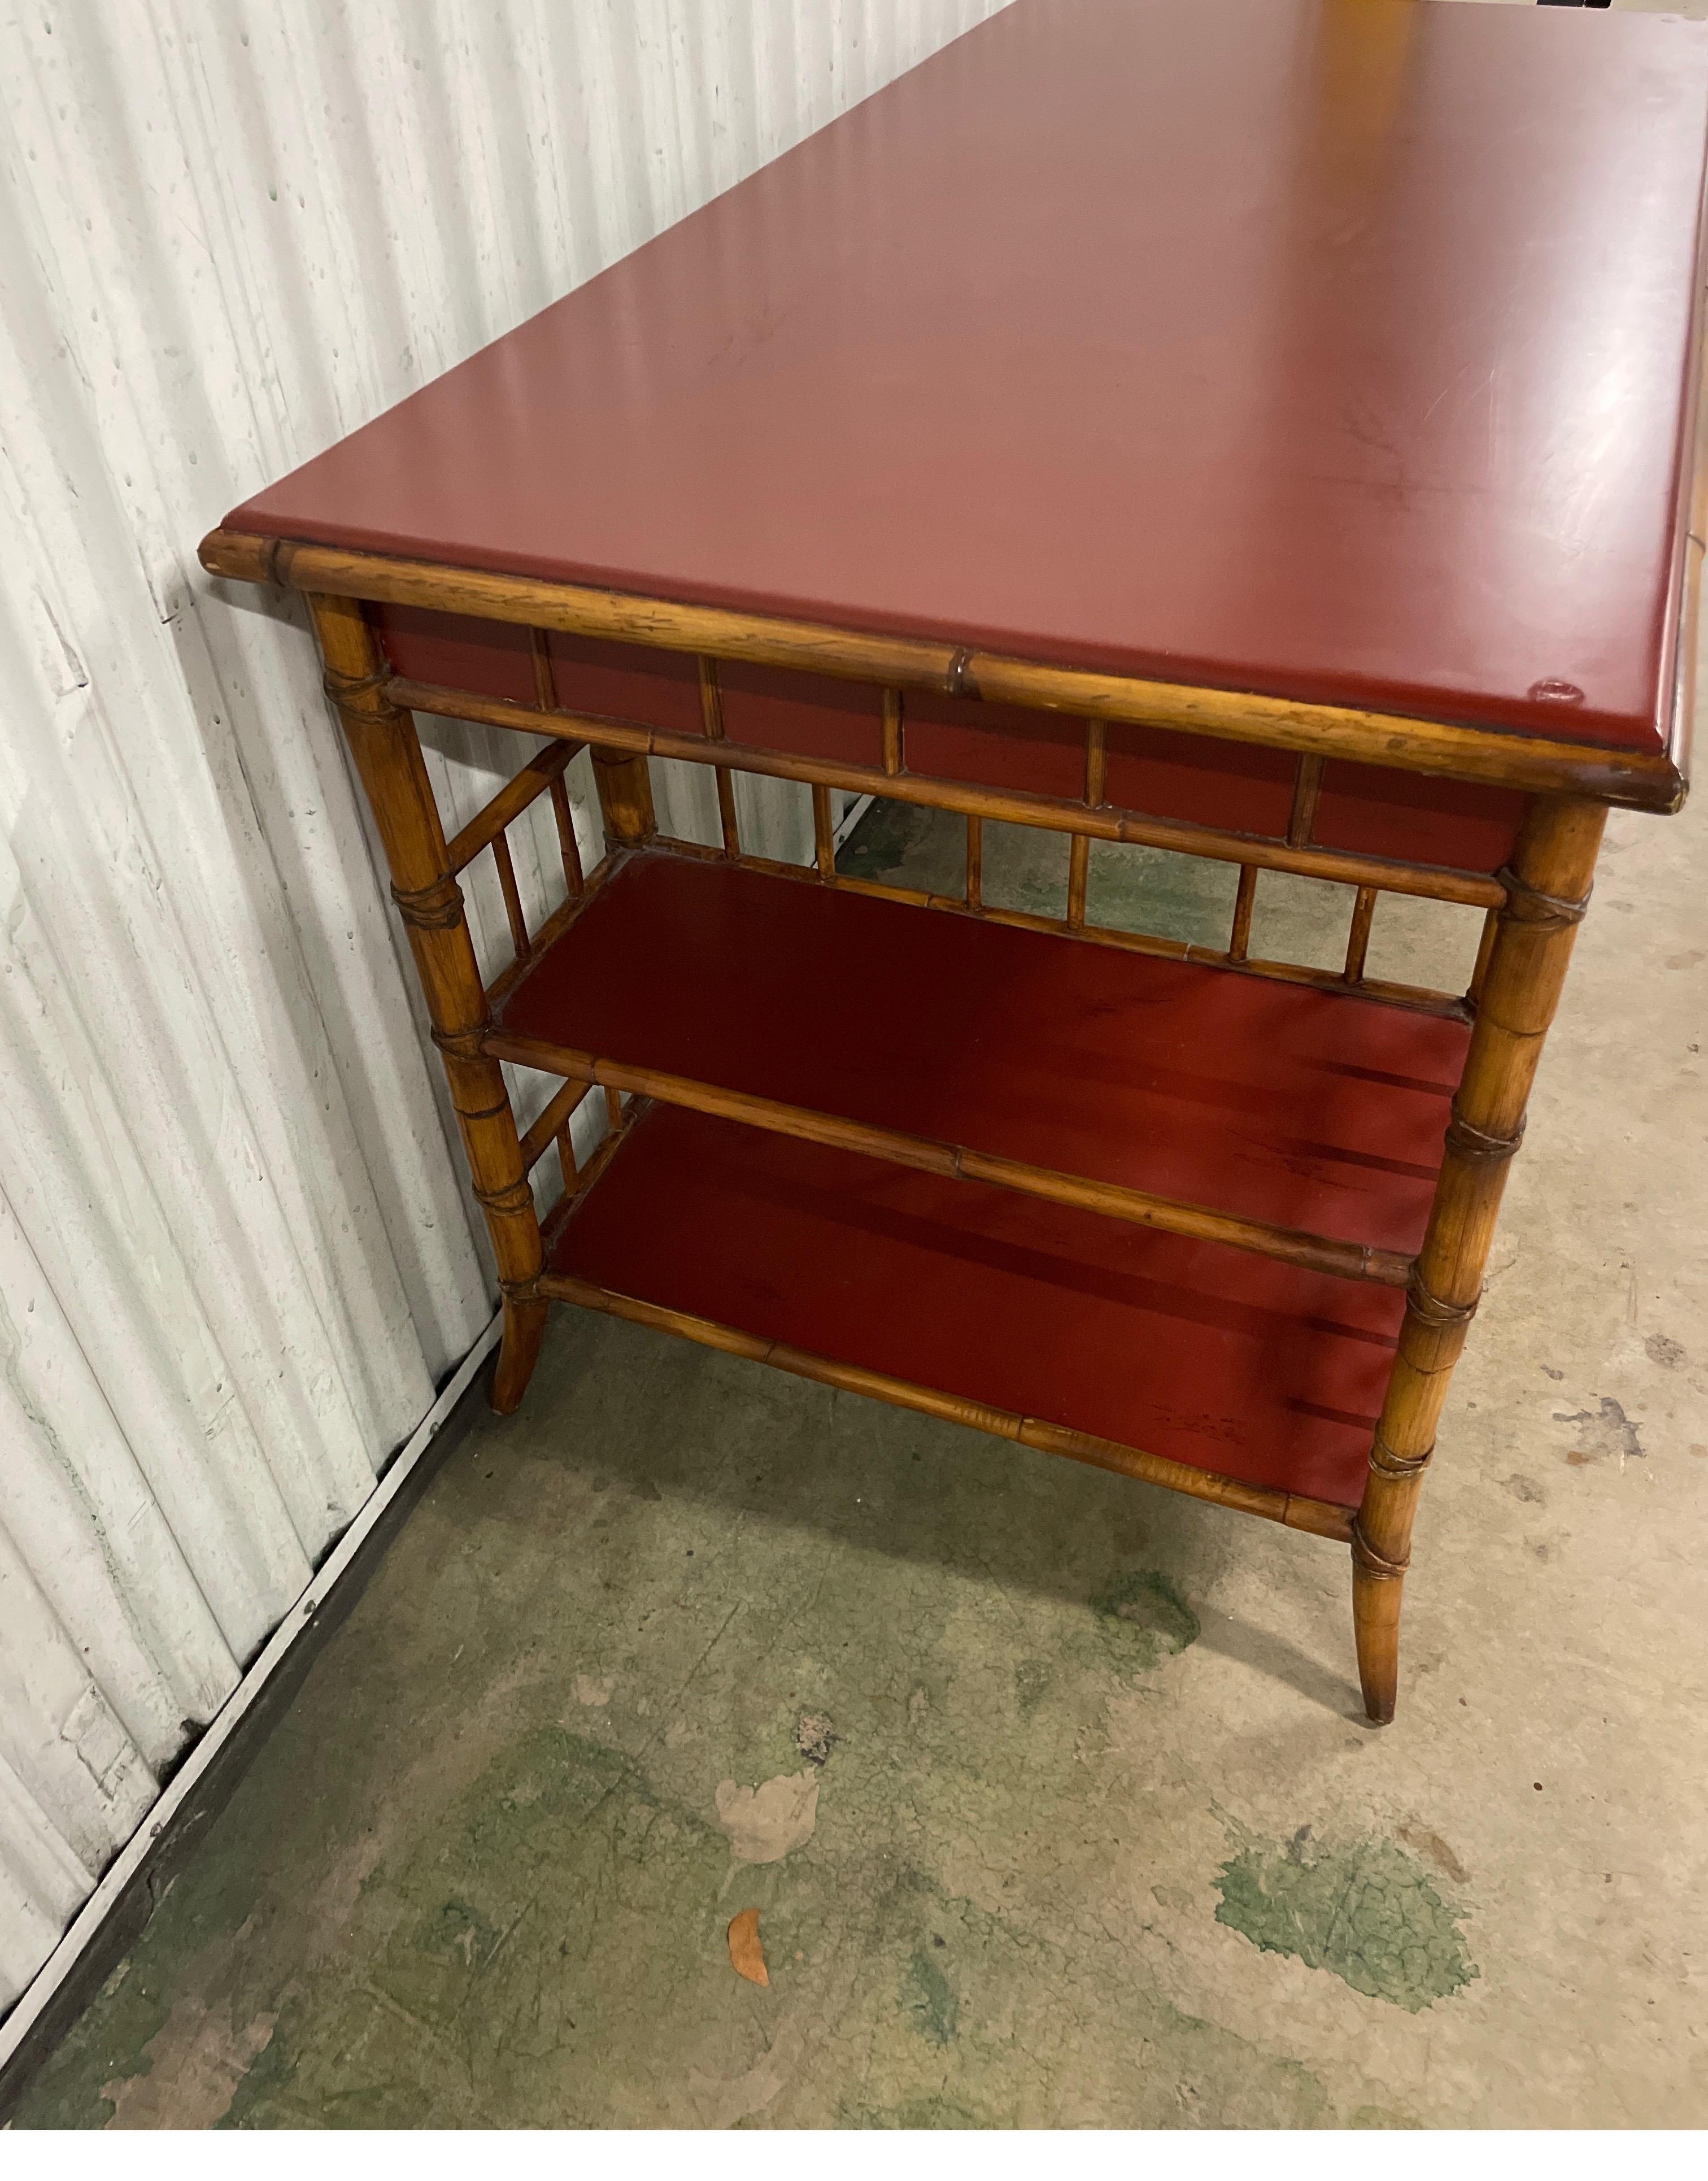 Wonderful Chinoiserie style bamboo desk with red lacquer top for Milling Road by Baker Furniture Company. One large middle drawer which will accommodate your computer. Each side has two shelves for storage.